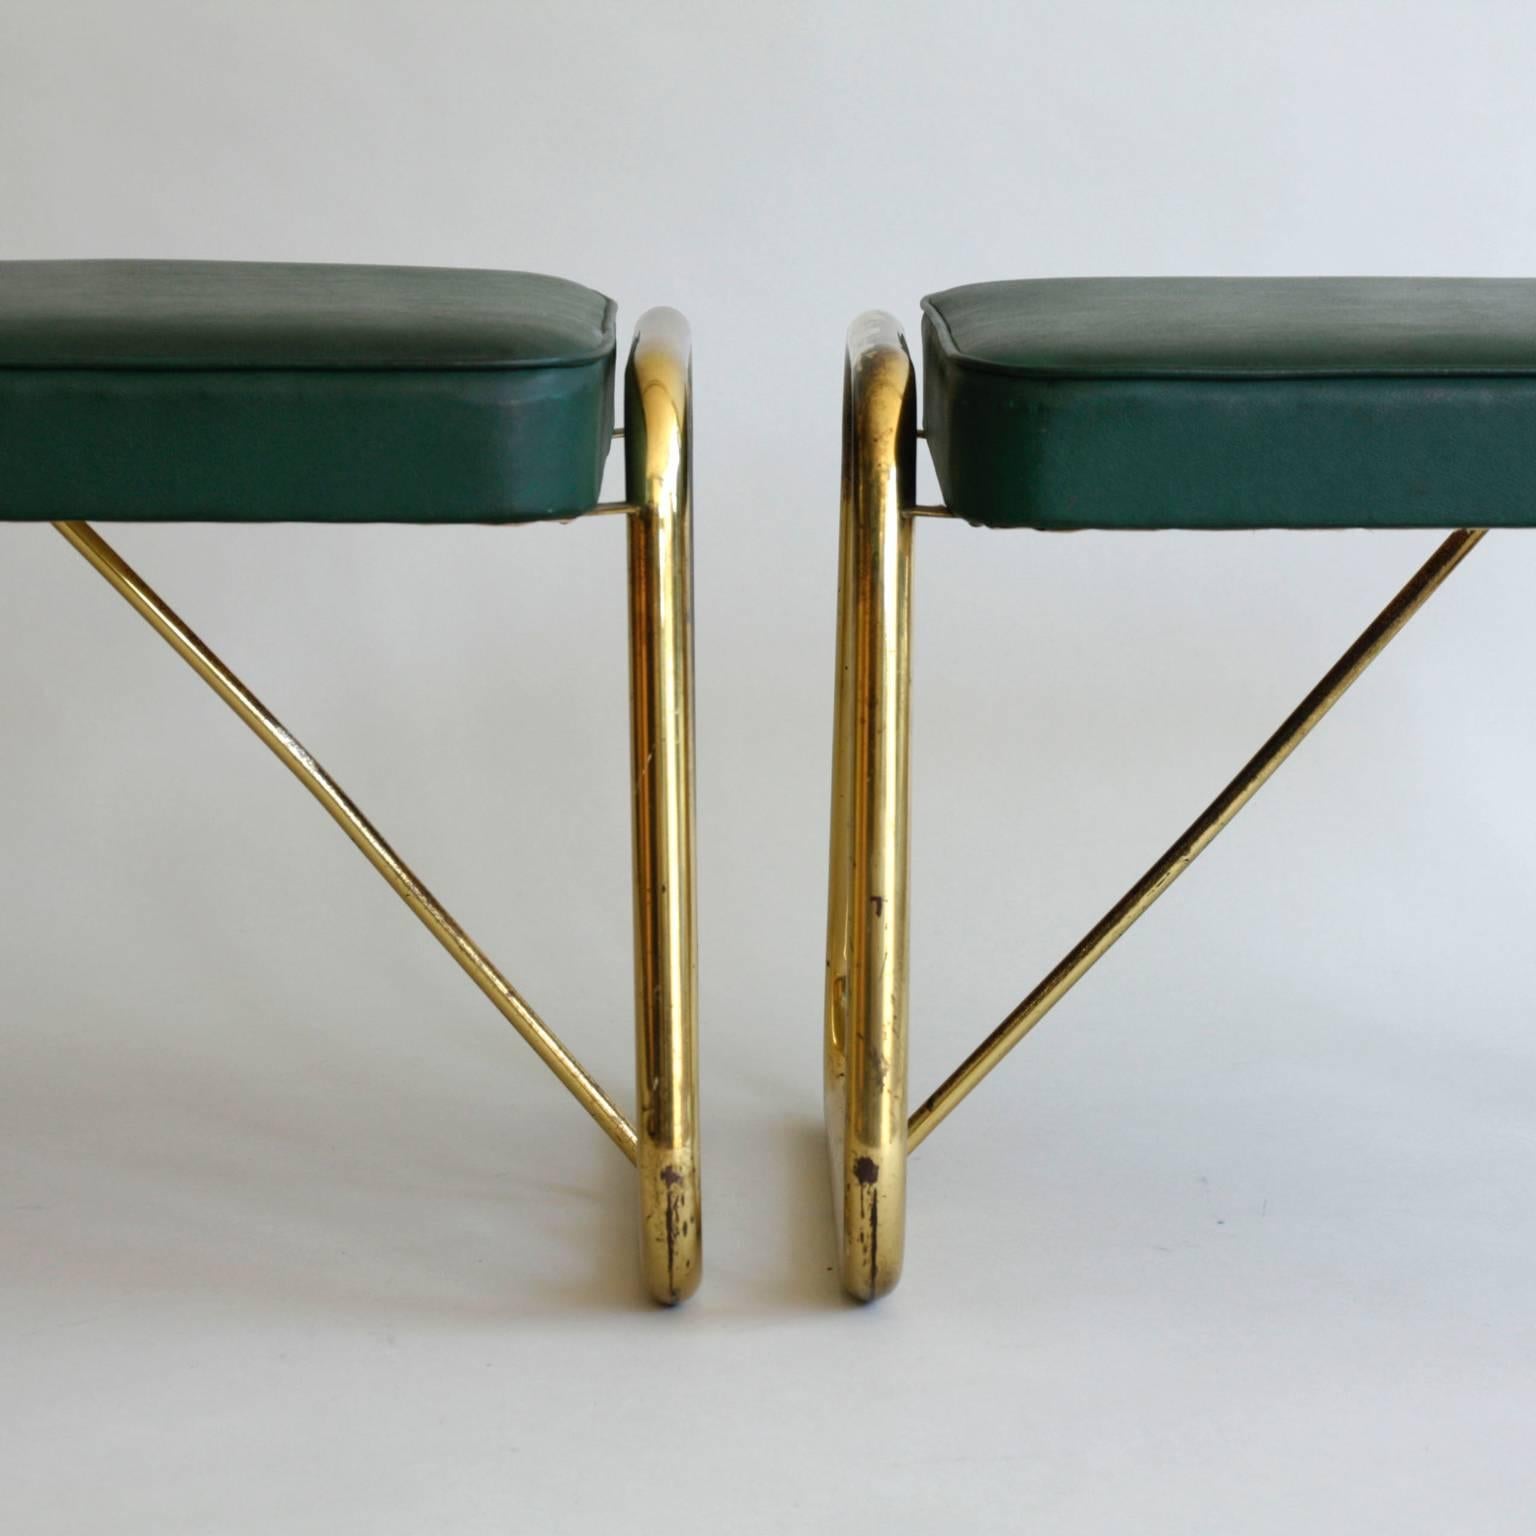 Pair of 1950s Italian Footstools or Ottomans, Brass and Green im Zustand „Gut“ in London, GB